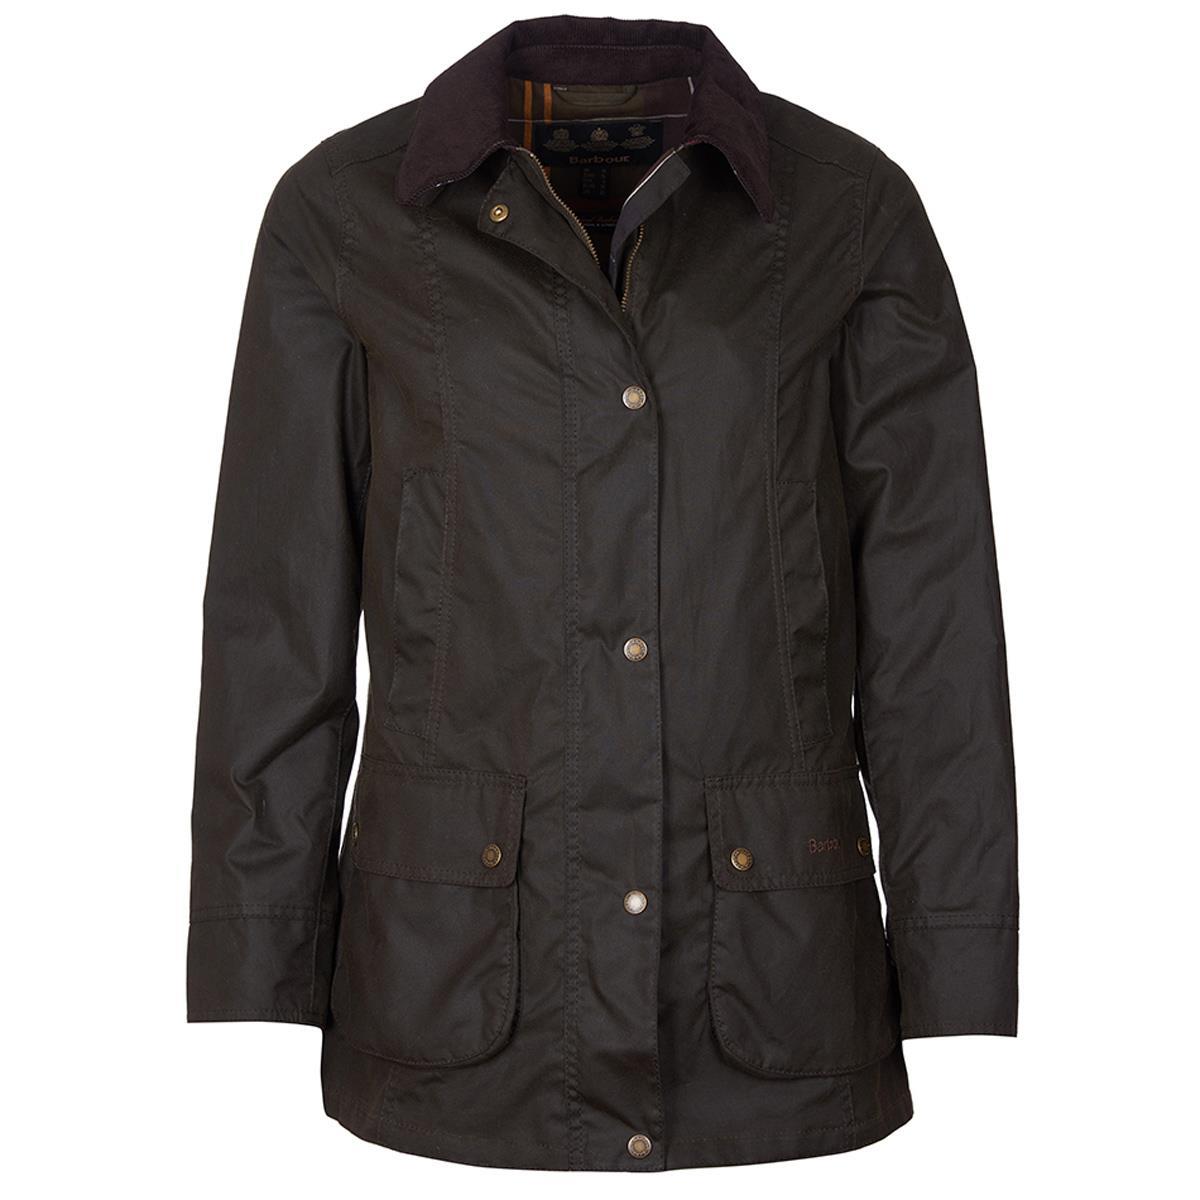 What is the material of the Barbour Fiddich Women's Wax Jacket?